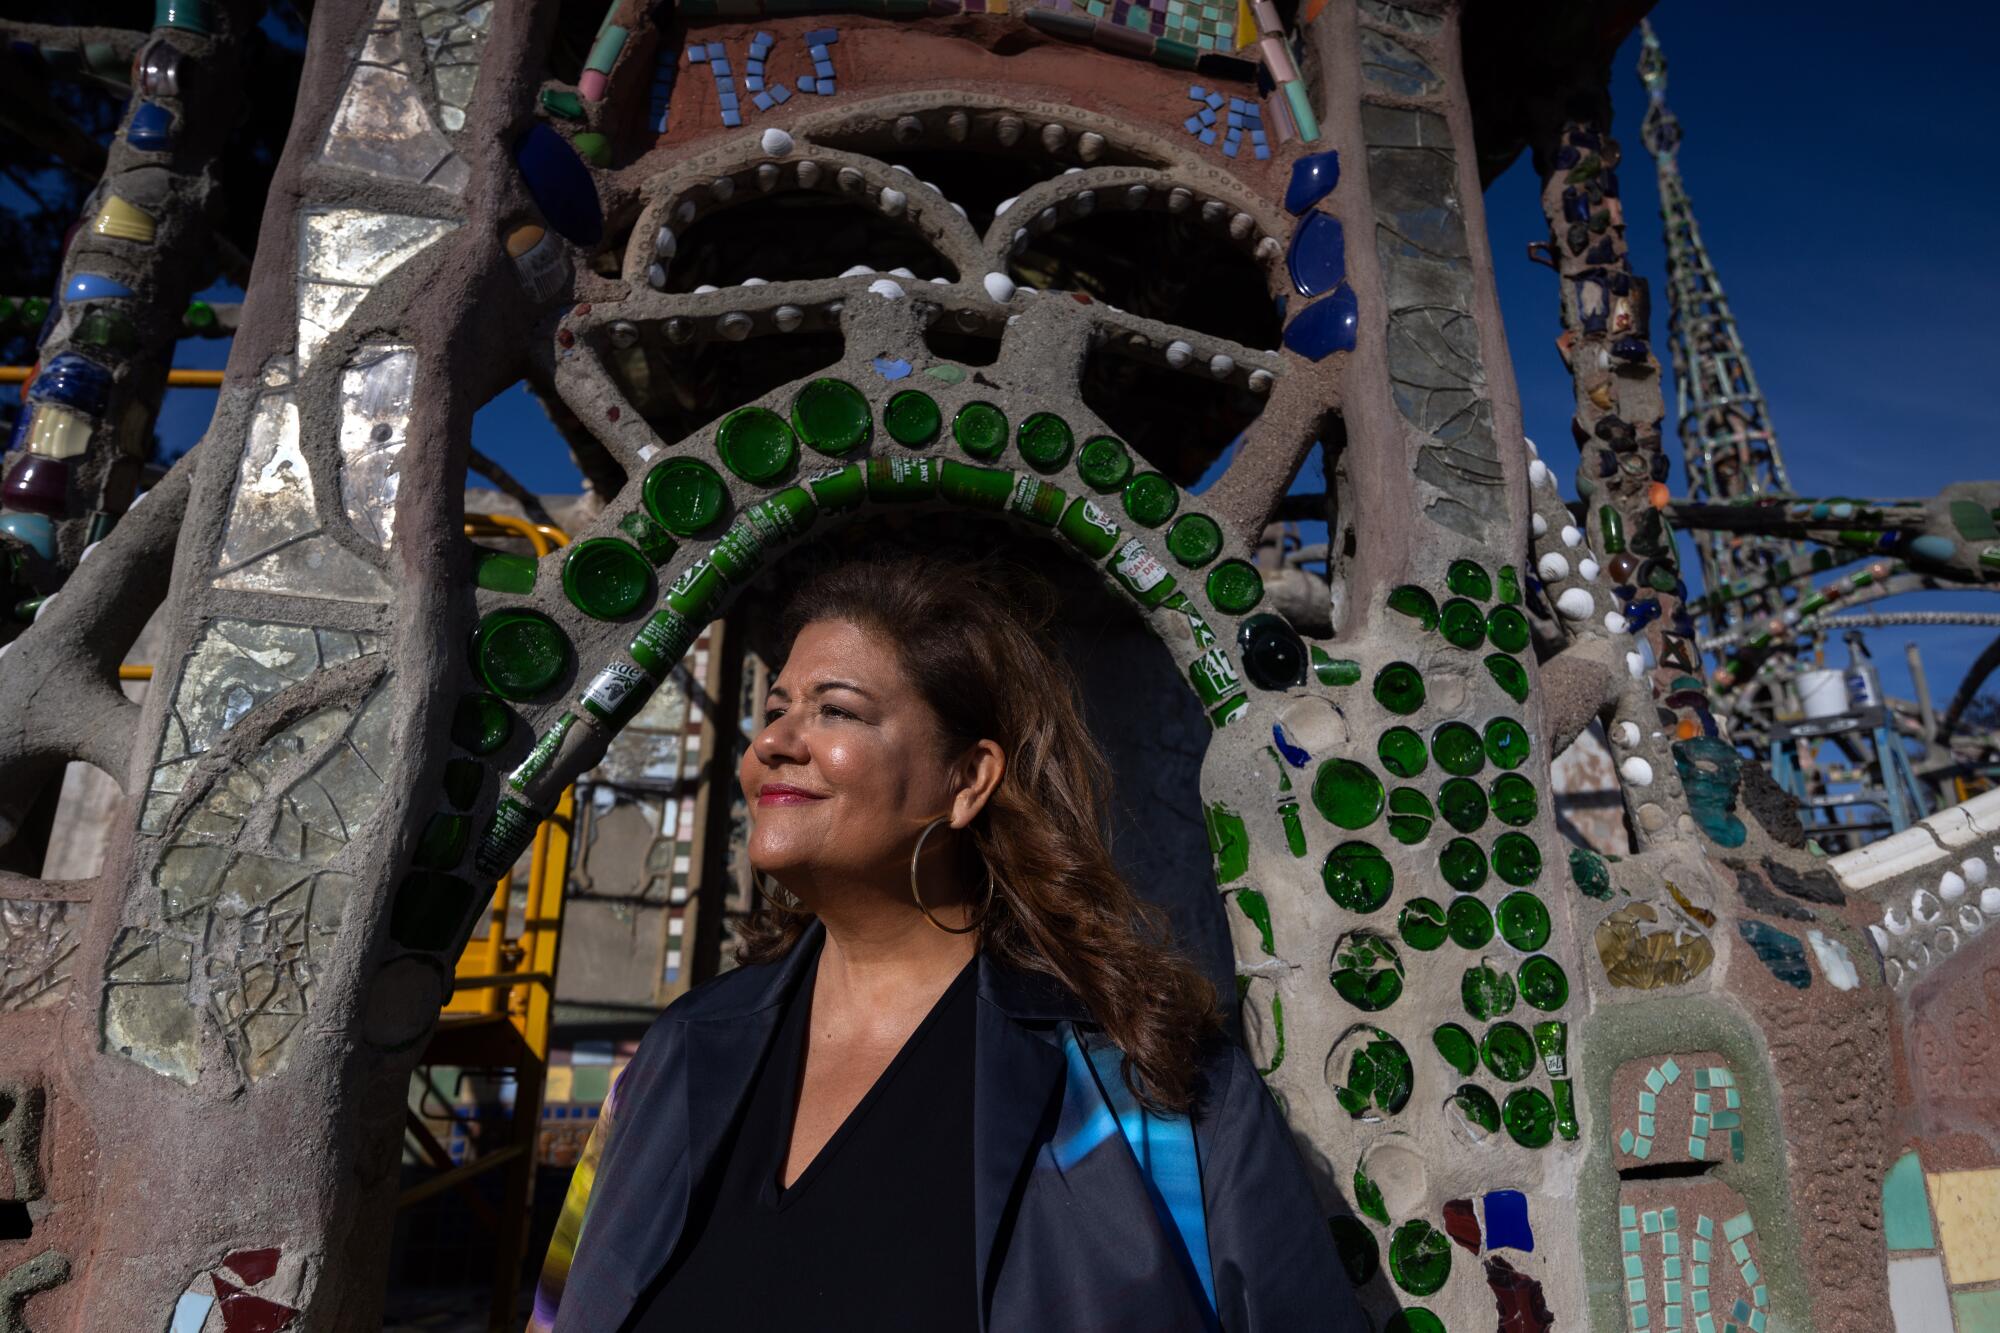 Elizabeth Alexander, a Black woman, is seen smiling, illuminated by the sun, her head and torso framed by a mosaic arch.